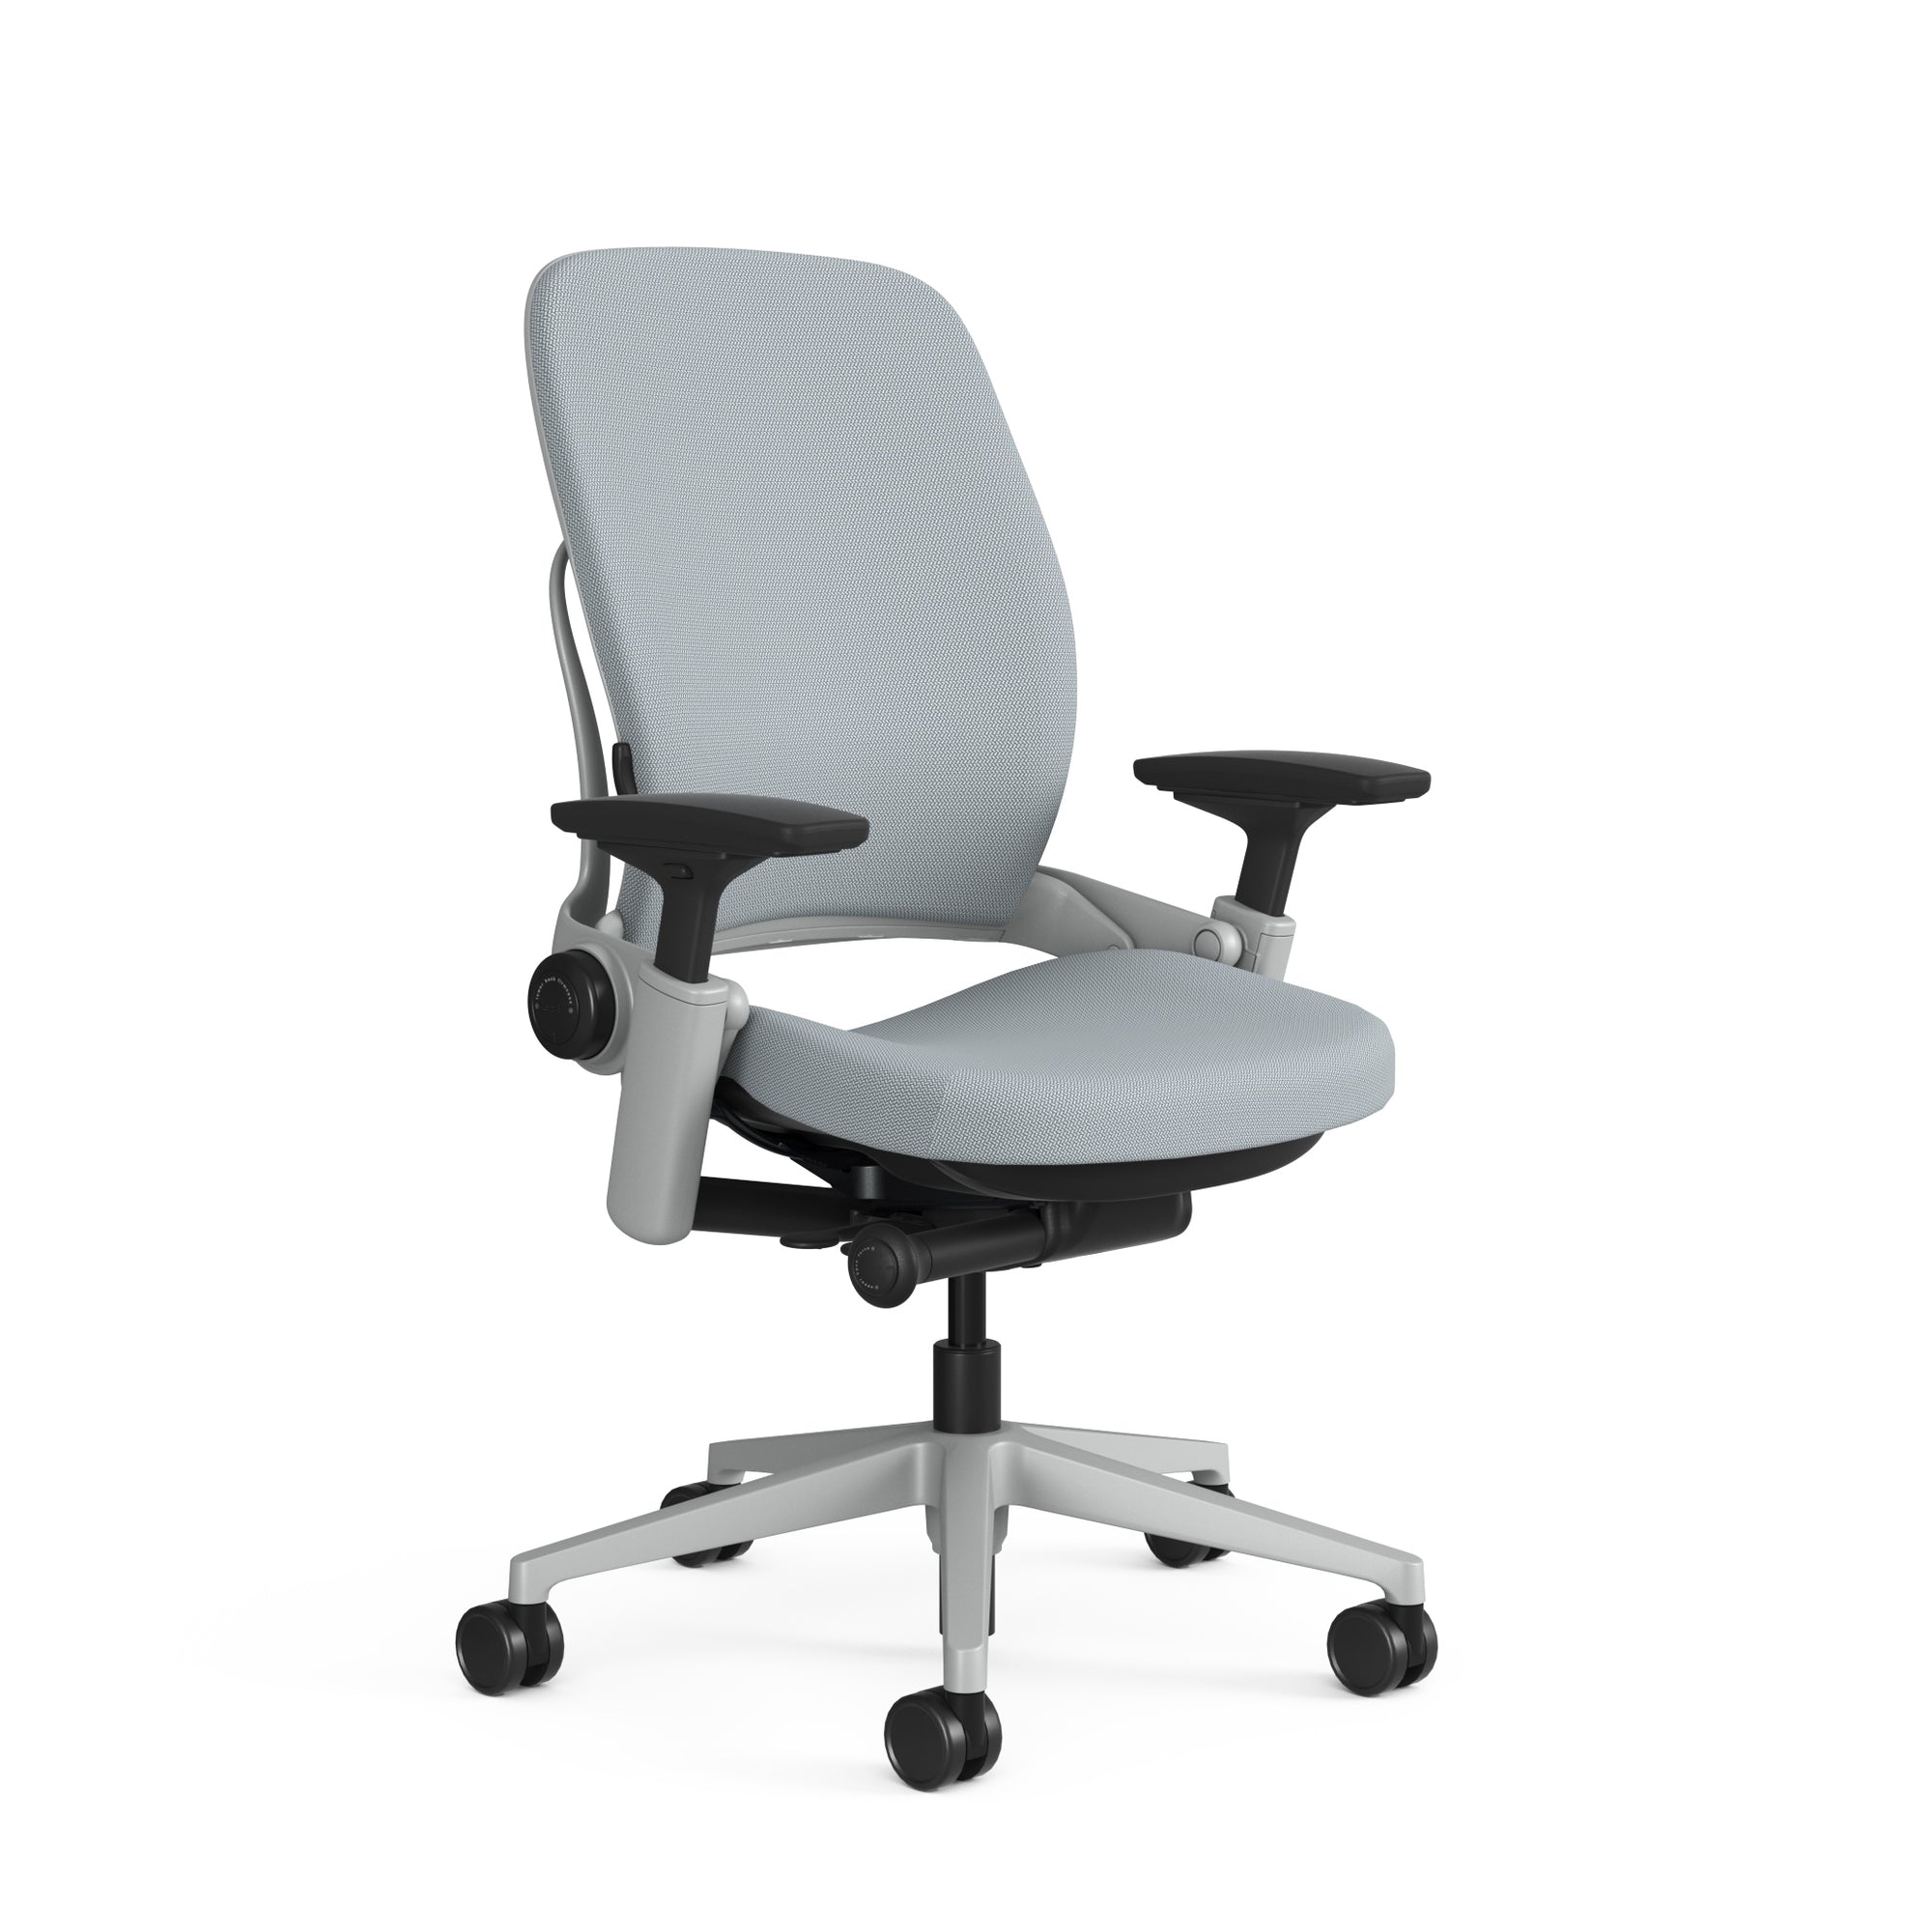 Steelcase Leap Ergonomic Office Chair - Steelcase India